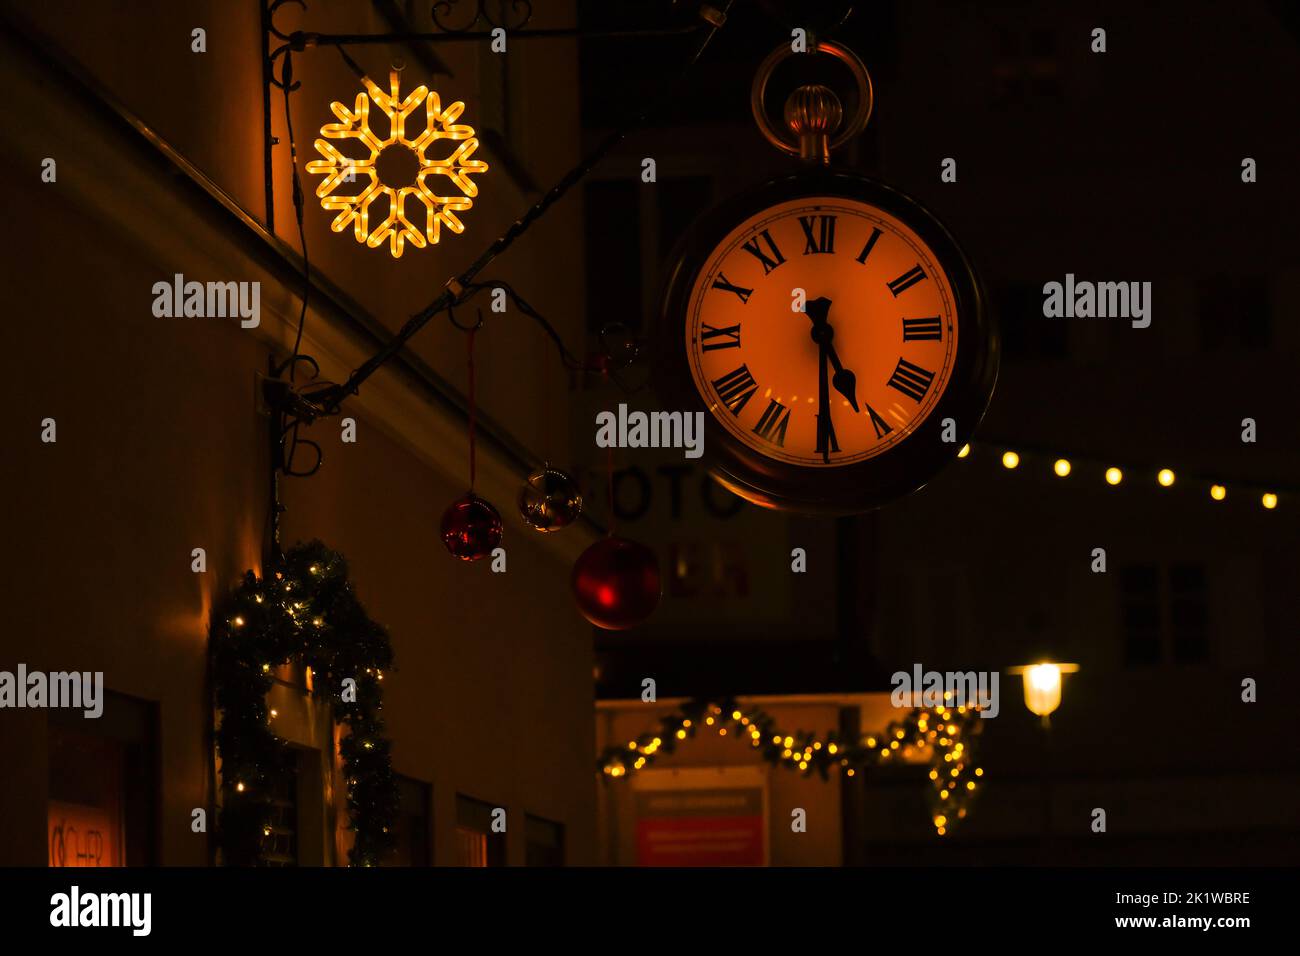 Christmas time in Europe. Street clock and Christmas decor on dark street background. Stock Photo